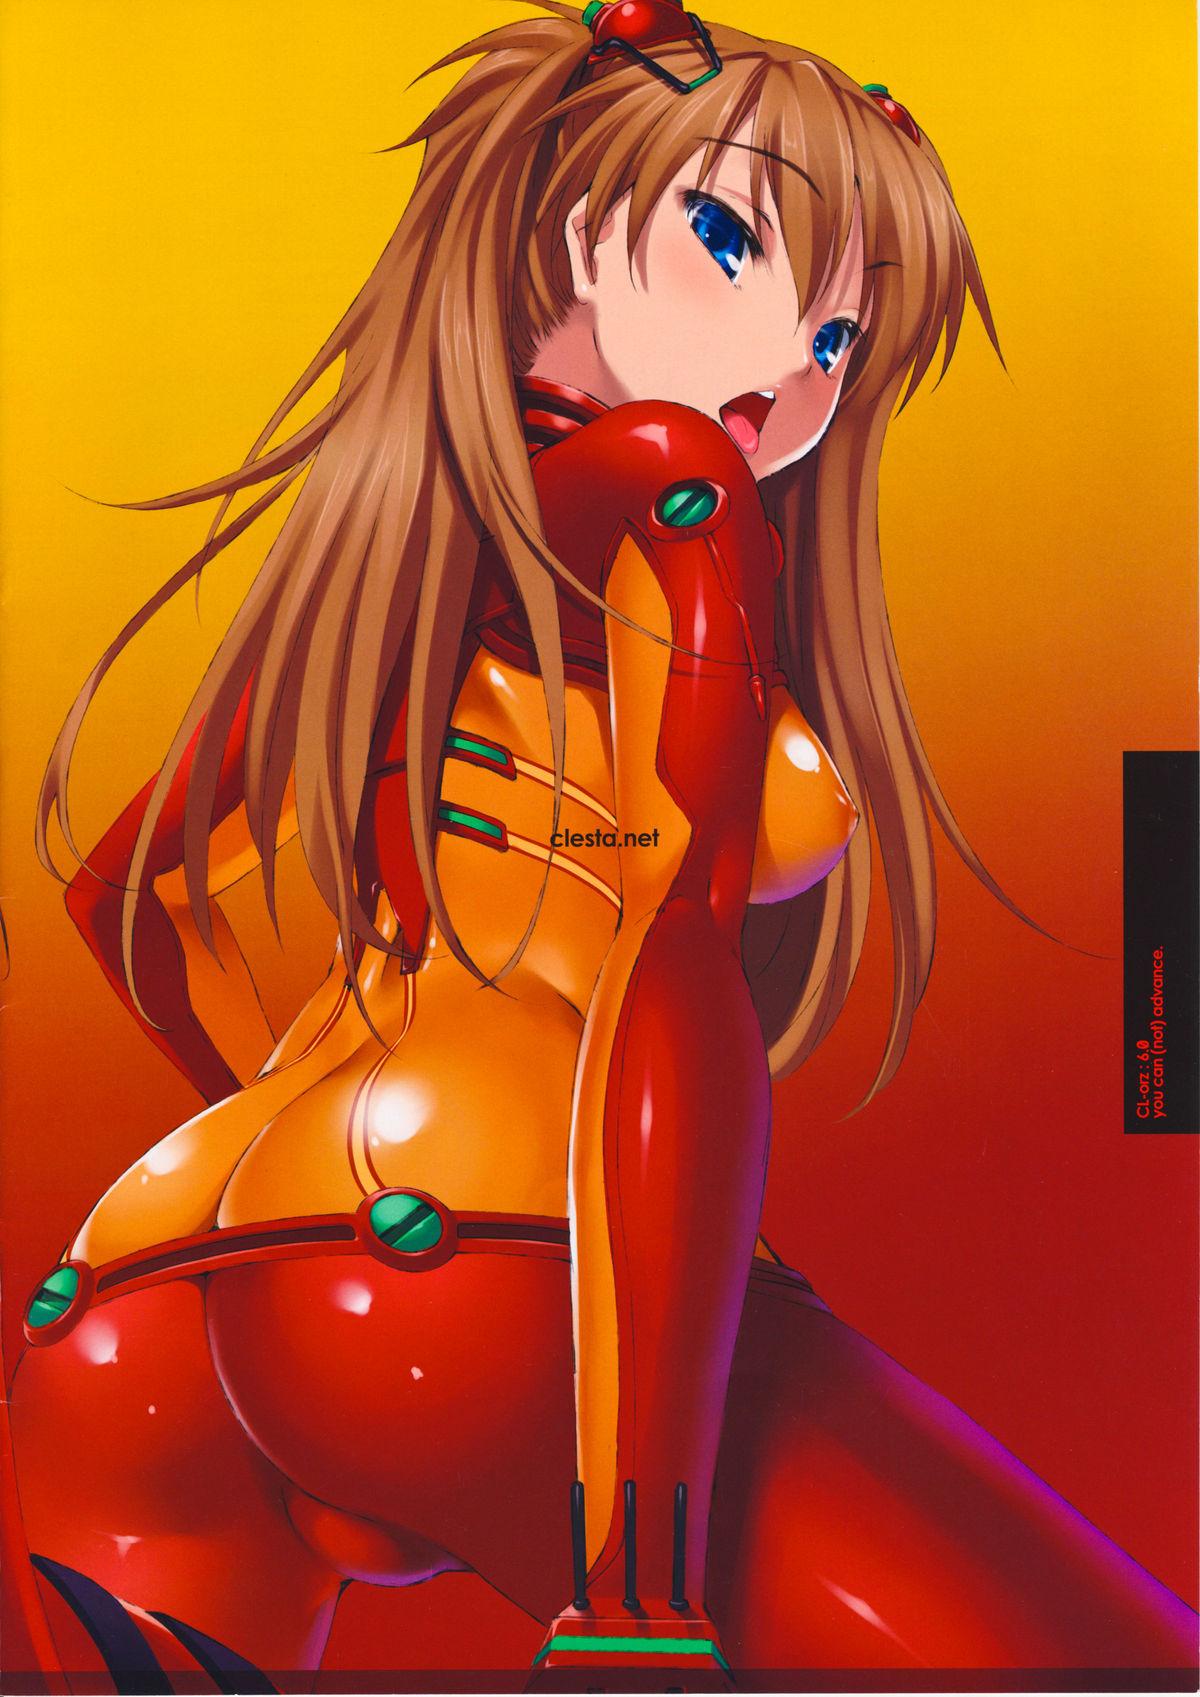 Three Some (C76) [Clesta (Cle Masahiro)] CL-orz 6.0 you can (not) advance. (Rebuild of Evangelion) [Decensored] - Neon genesis evangelion Ngentot - Page 16